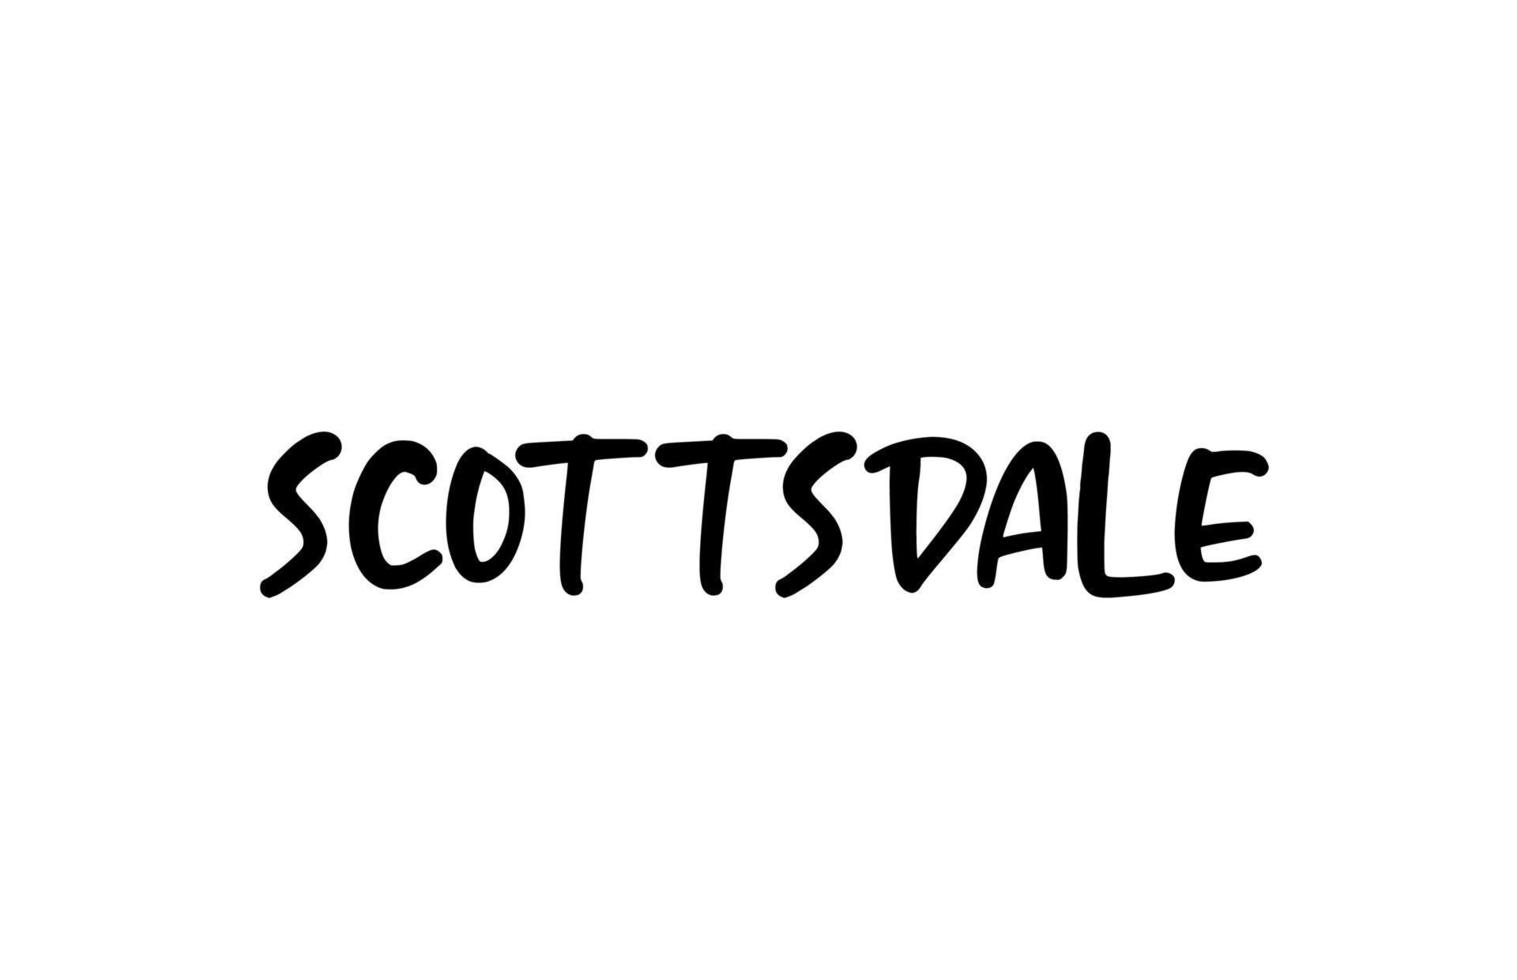 Scottsdale city handwritten typography word text hand lettering. Modern calligraphy text. Black color vector